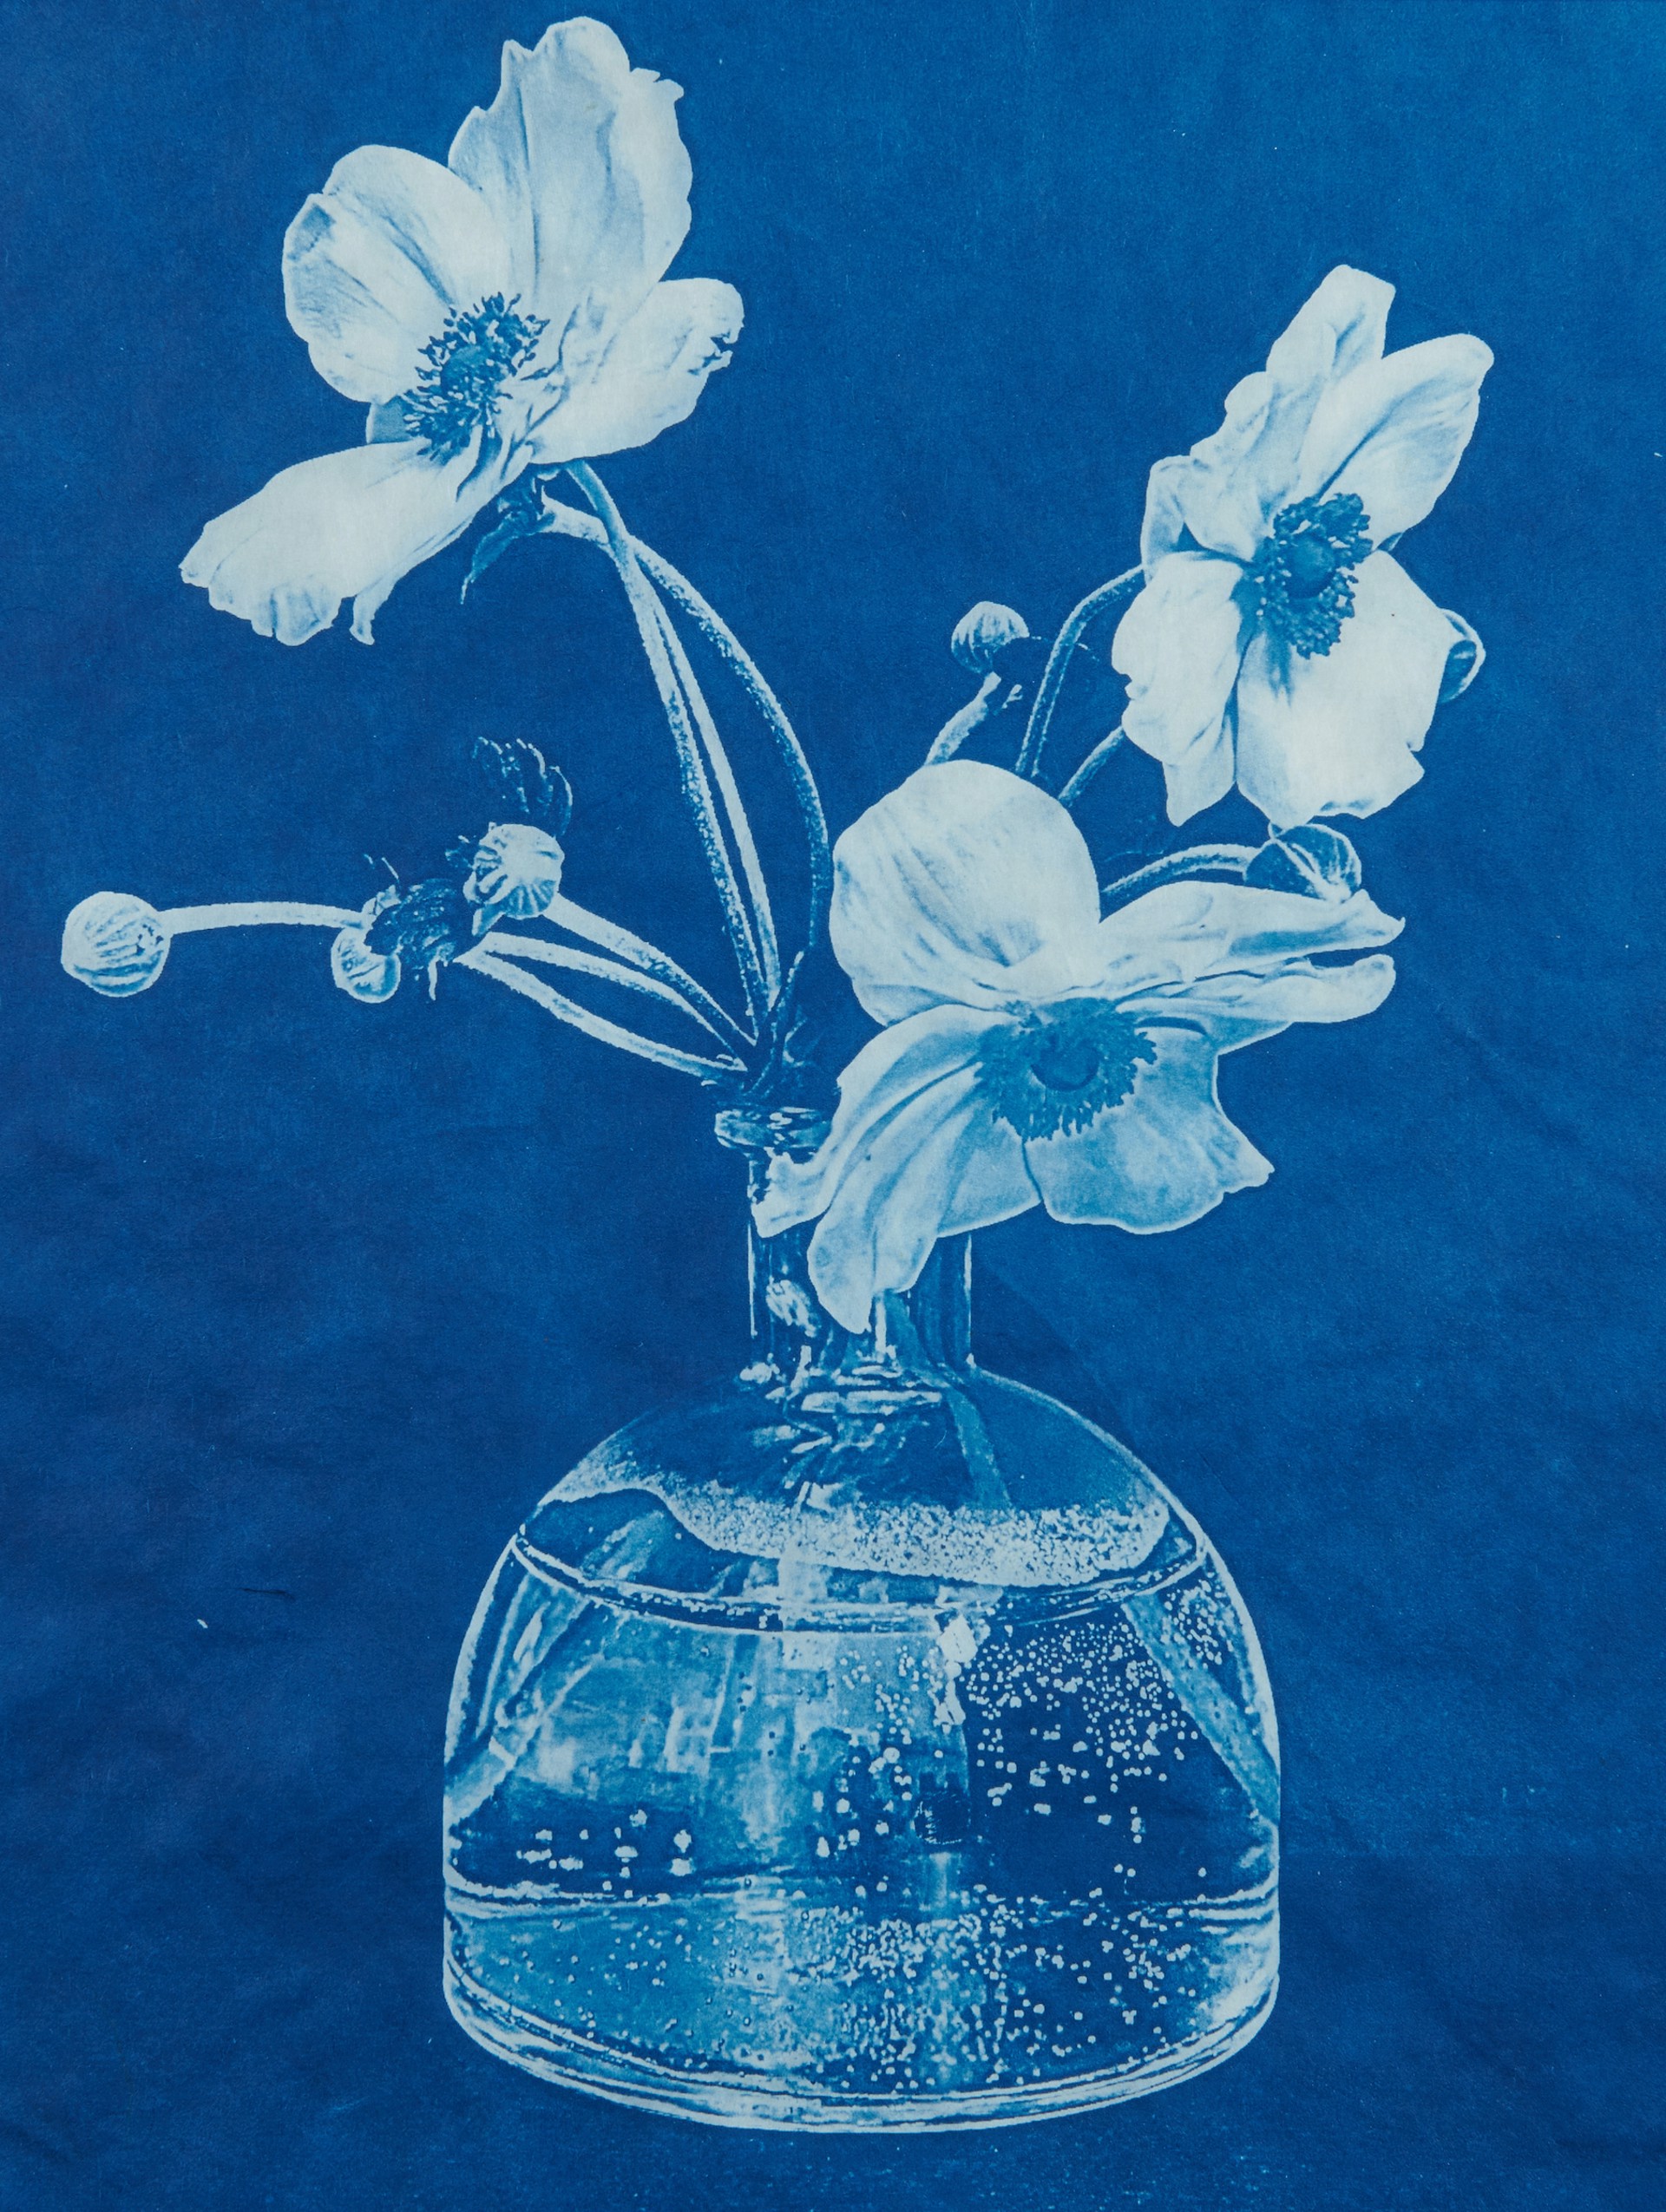 Japanese Anemone in Round Vase by Claudia Hollister